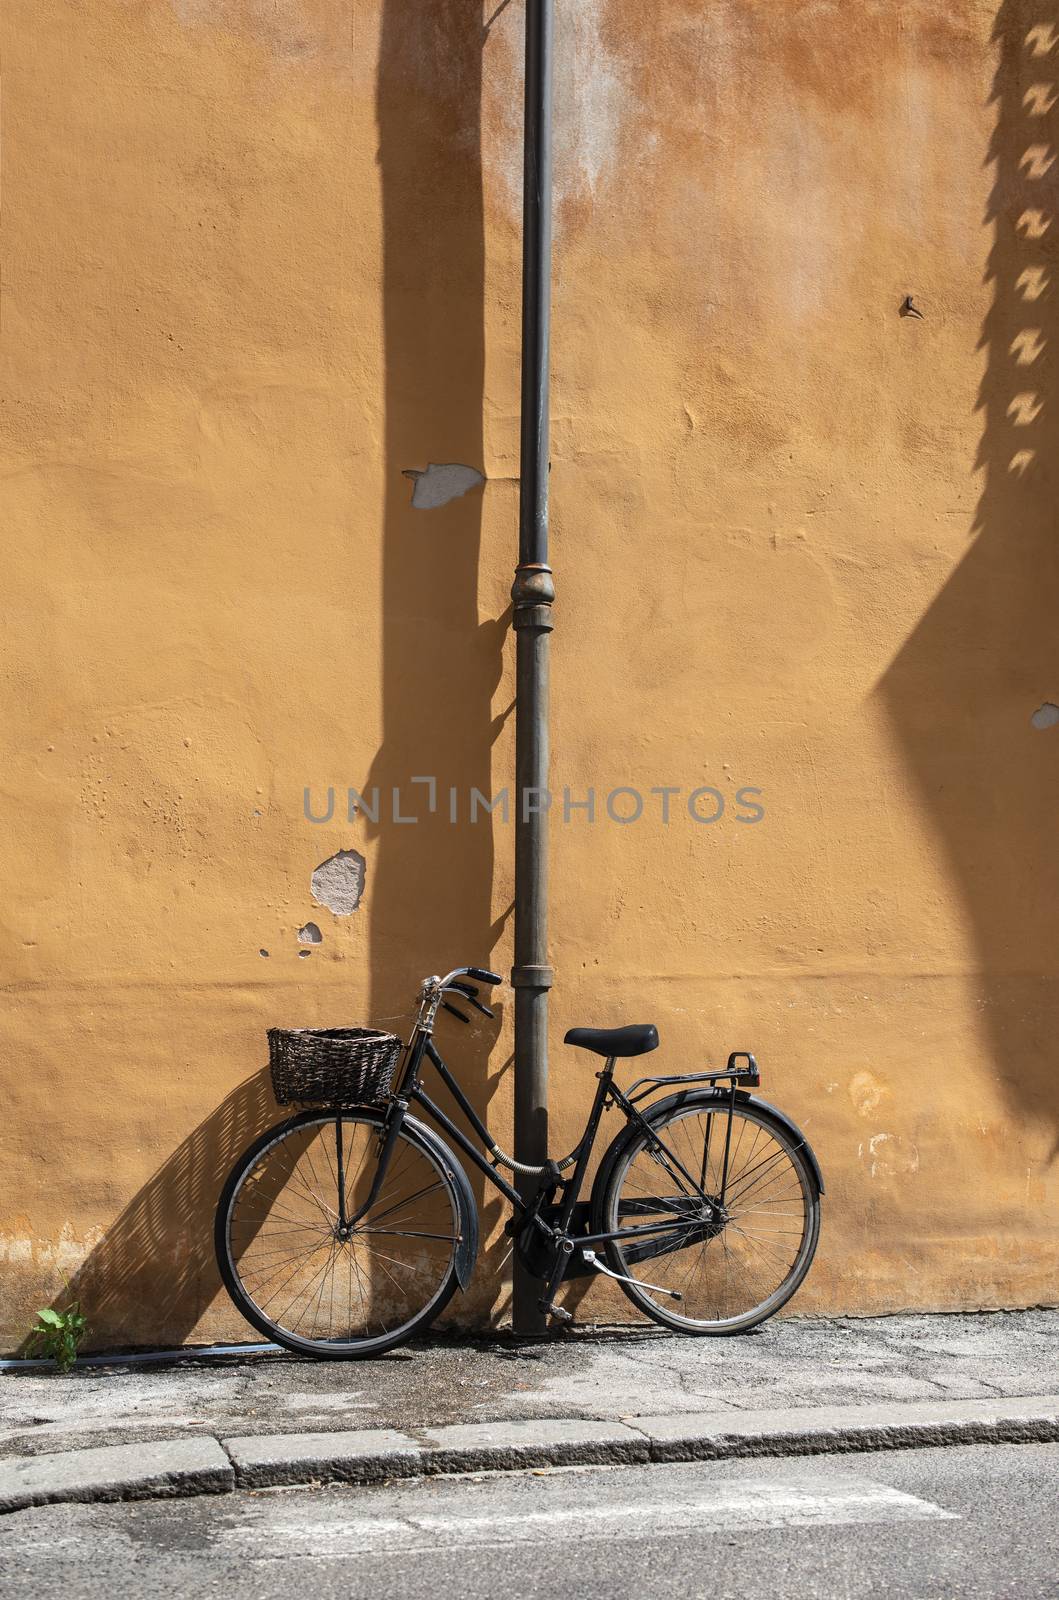 Black bike with basket on italian street. Typical italian architecture on background. Sunny day. Typical italian style.